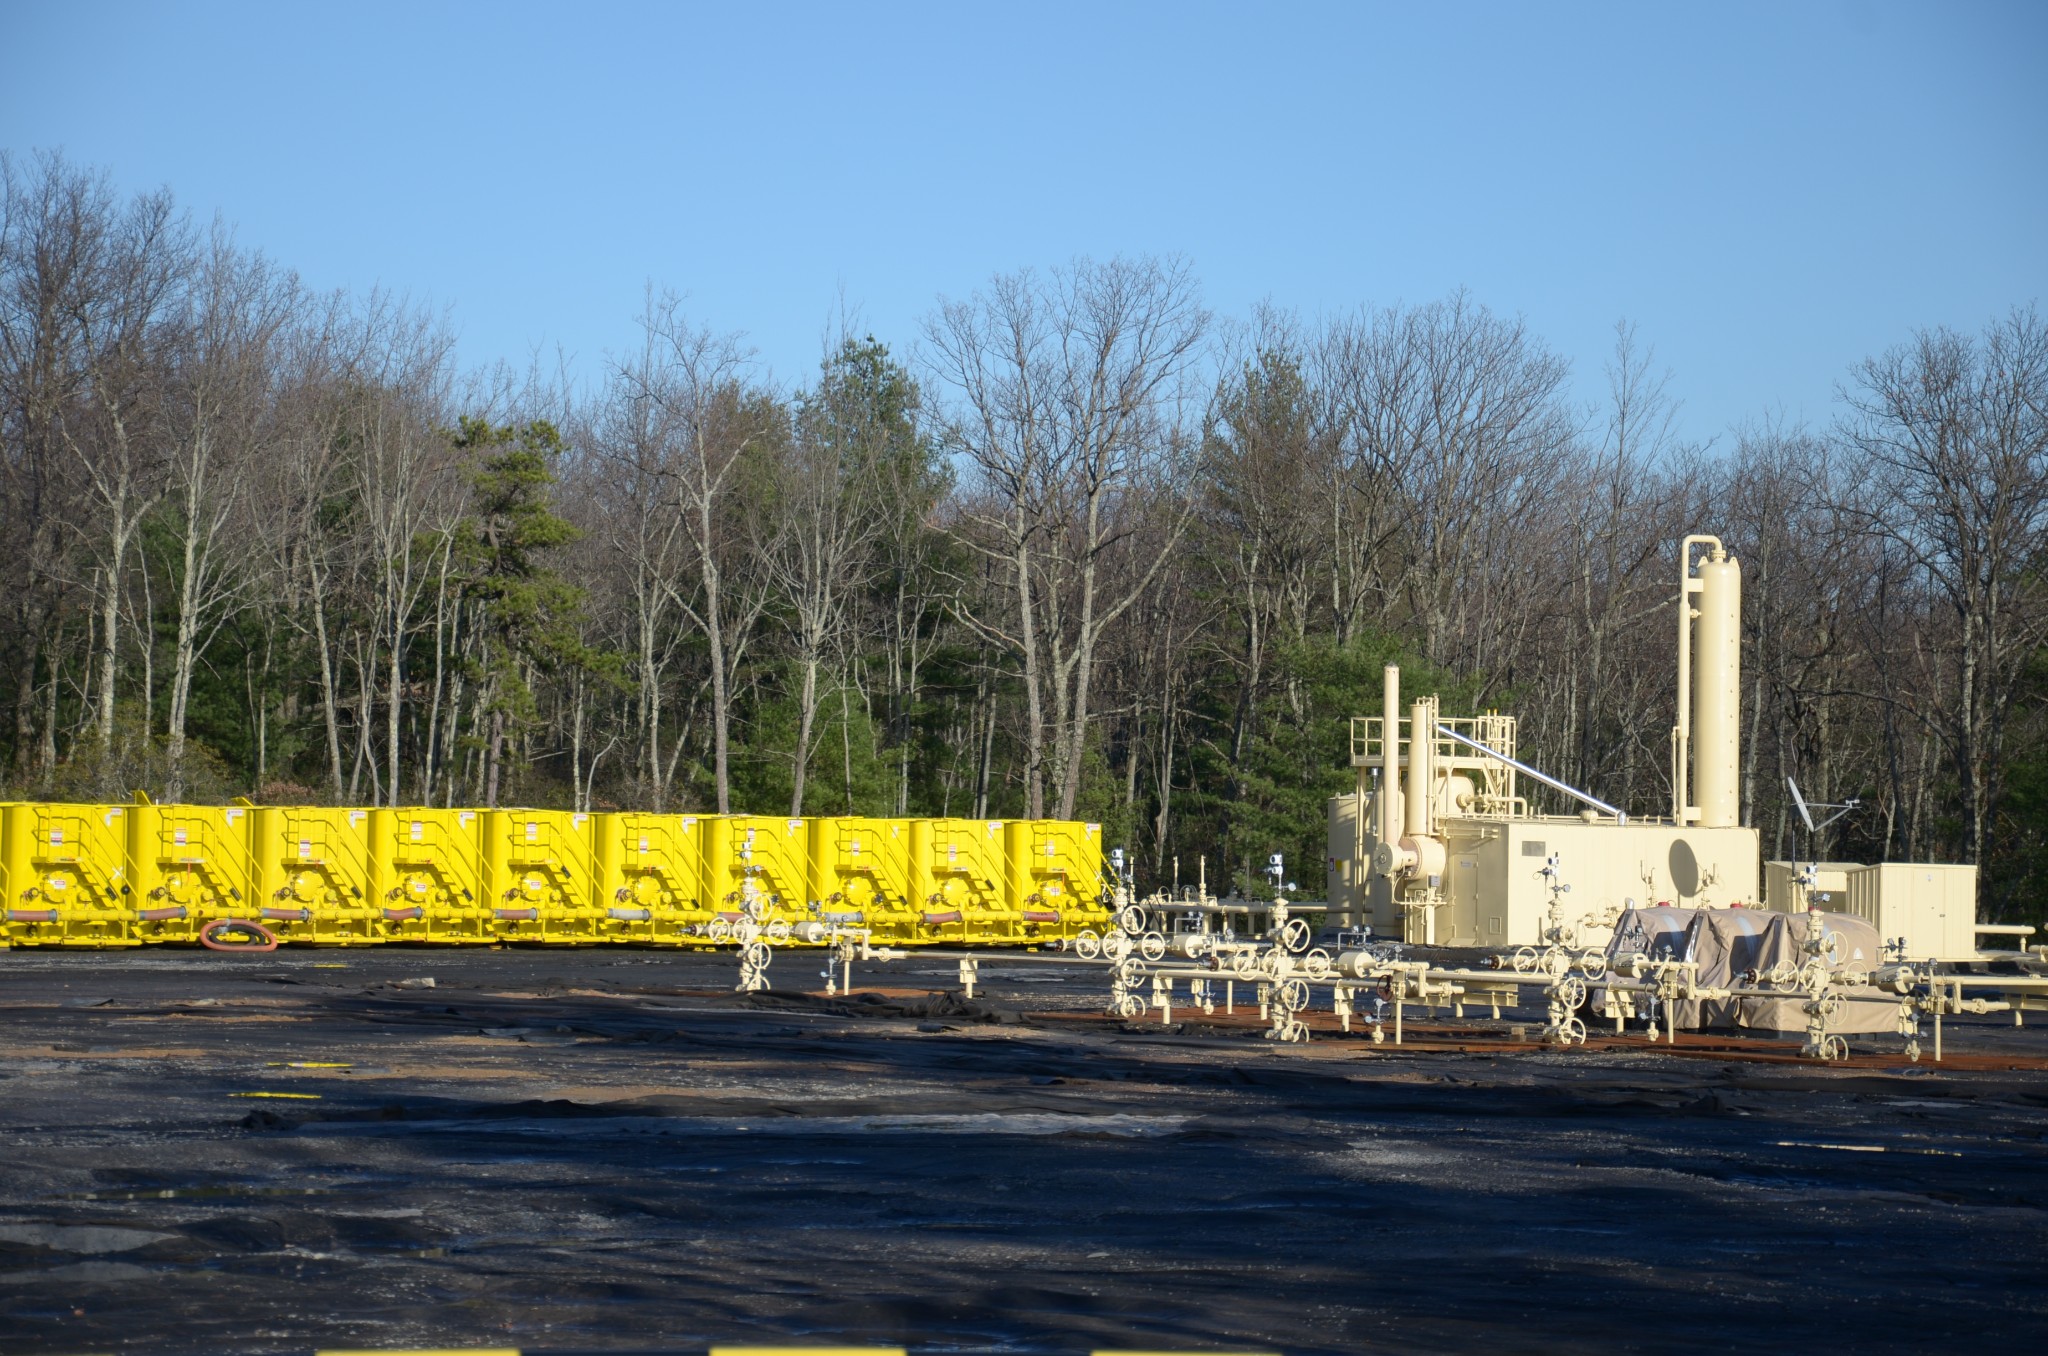 The shale gas boom in Pennsylvania has resulted in drilling in the midst of agricultural, forest, and even residential areas. Well pads, such as this one, are common. (Image: Dimiter Kenarov)